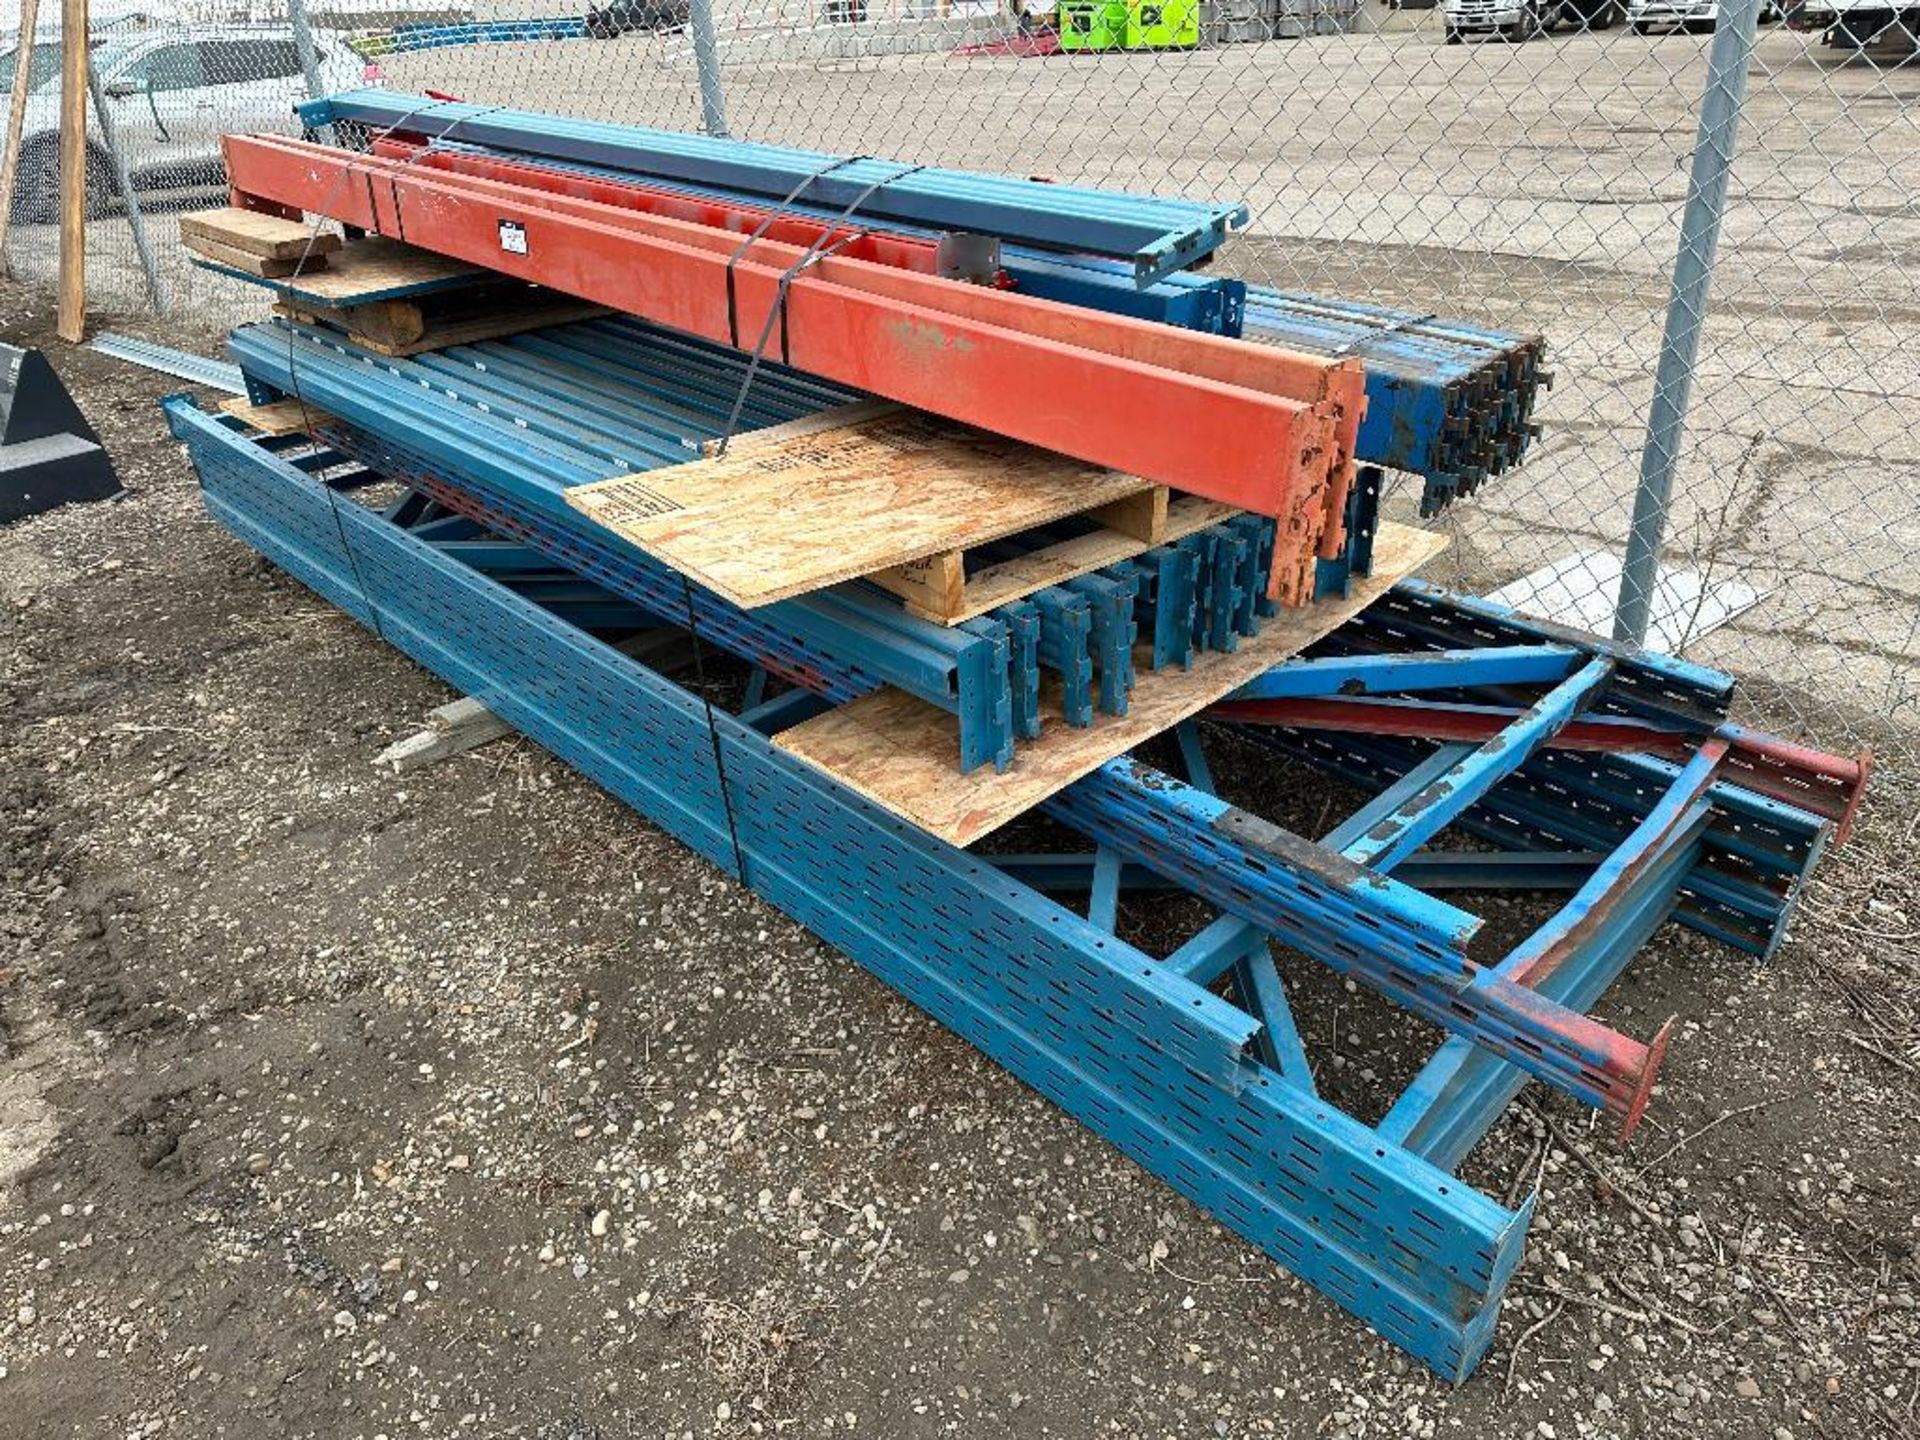 Lot of asst. Pallet Racking Frames and Beams - Various Sizes - Image 2 of 4